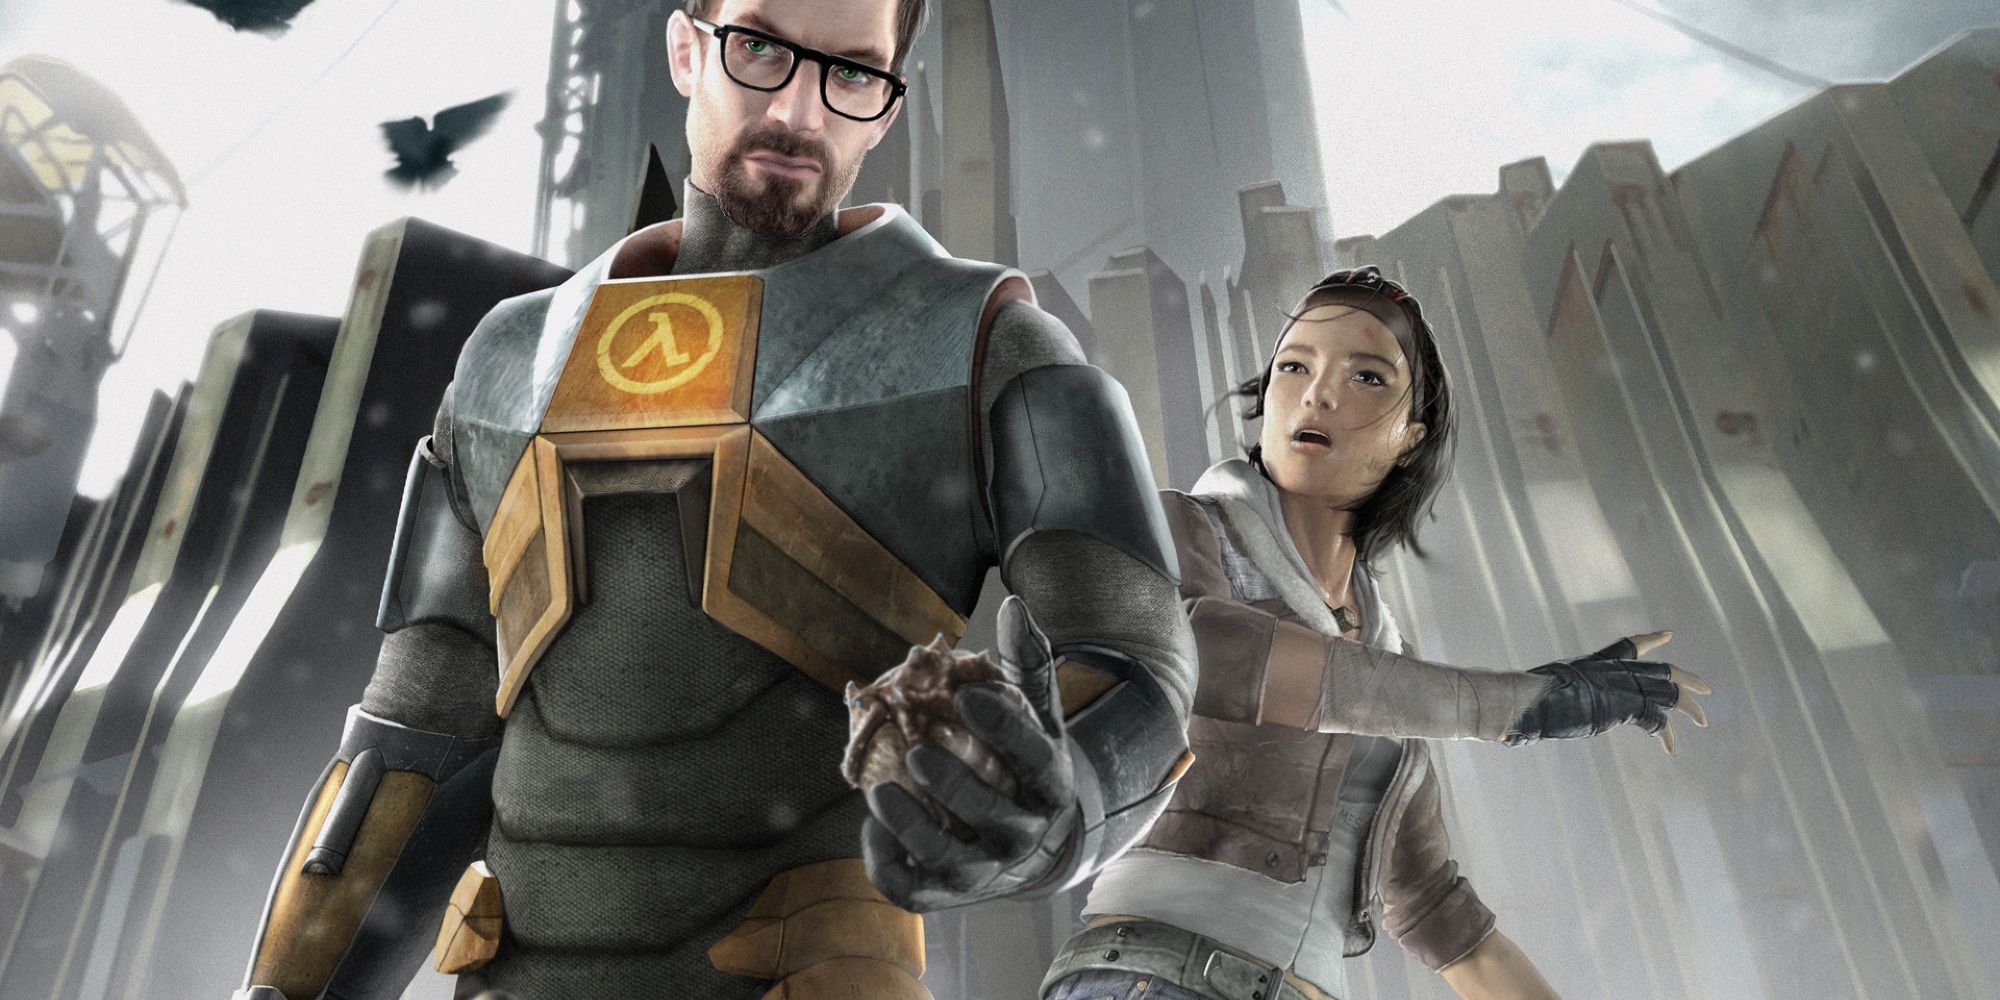 poster for the game Half-Life 2 featuring the main characters Gordon Freeman and Alyx Vance